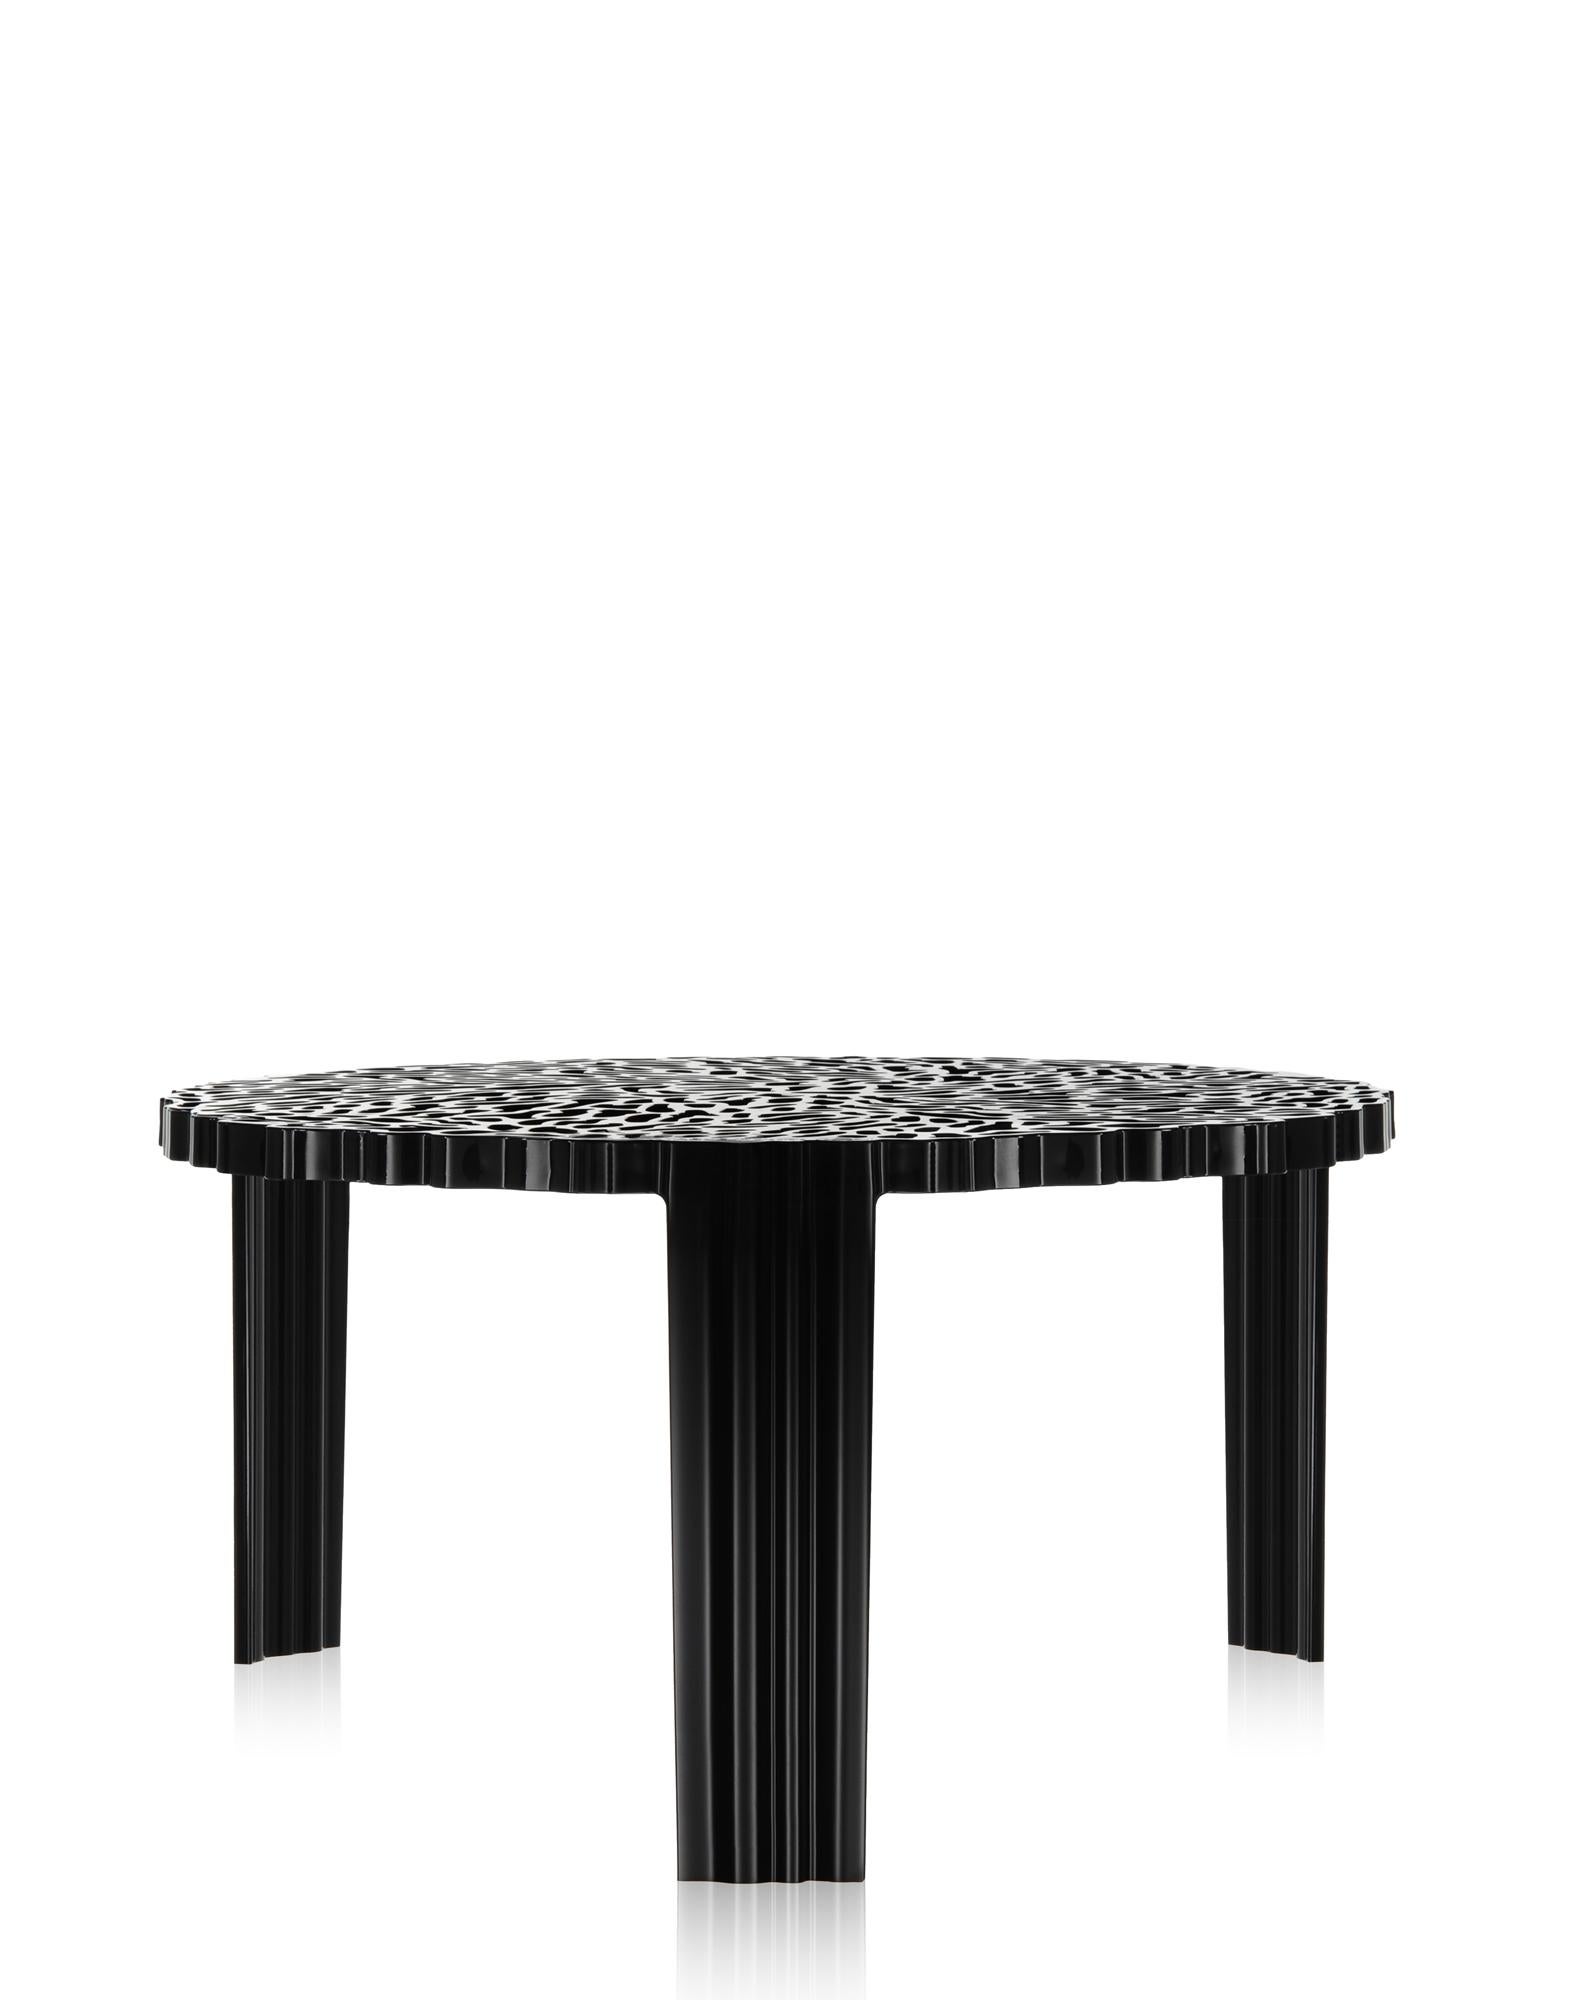 A line of tables in three heights. The surface of the T-table top alternates fullness and space to create an elegant and precious effect which is reminiscent of embroidery.

It comes in 3 different heights.